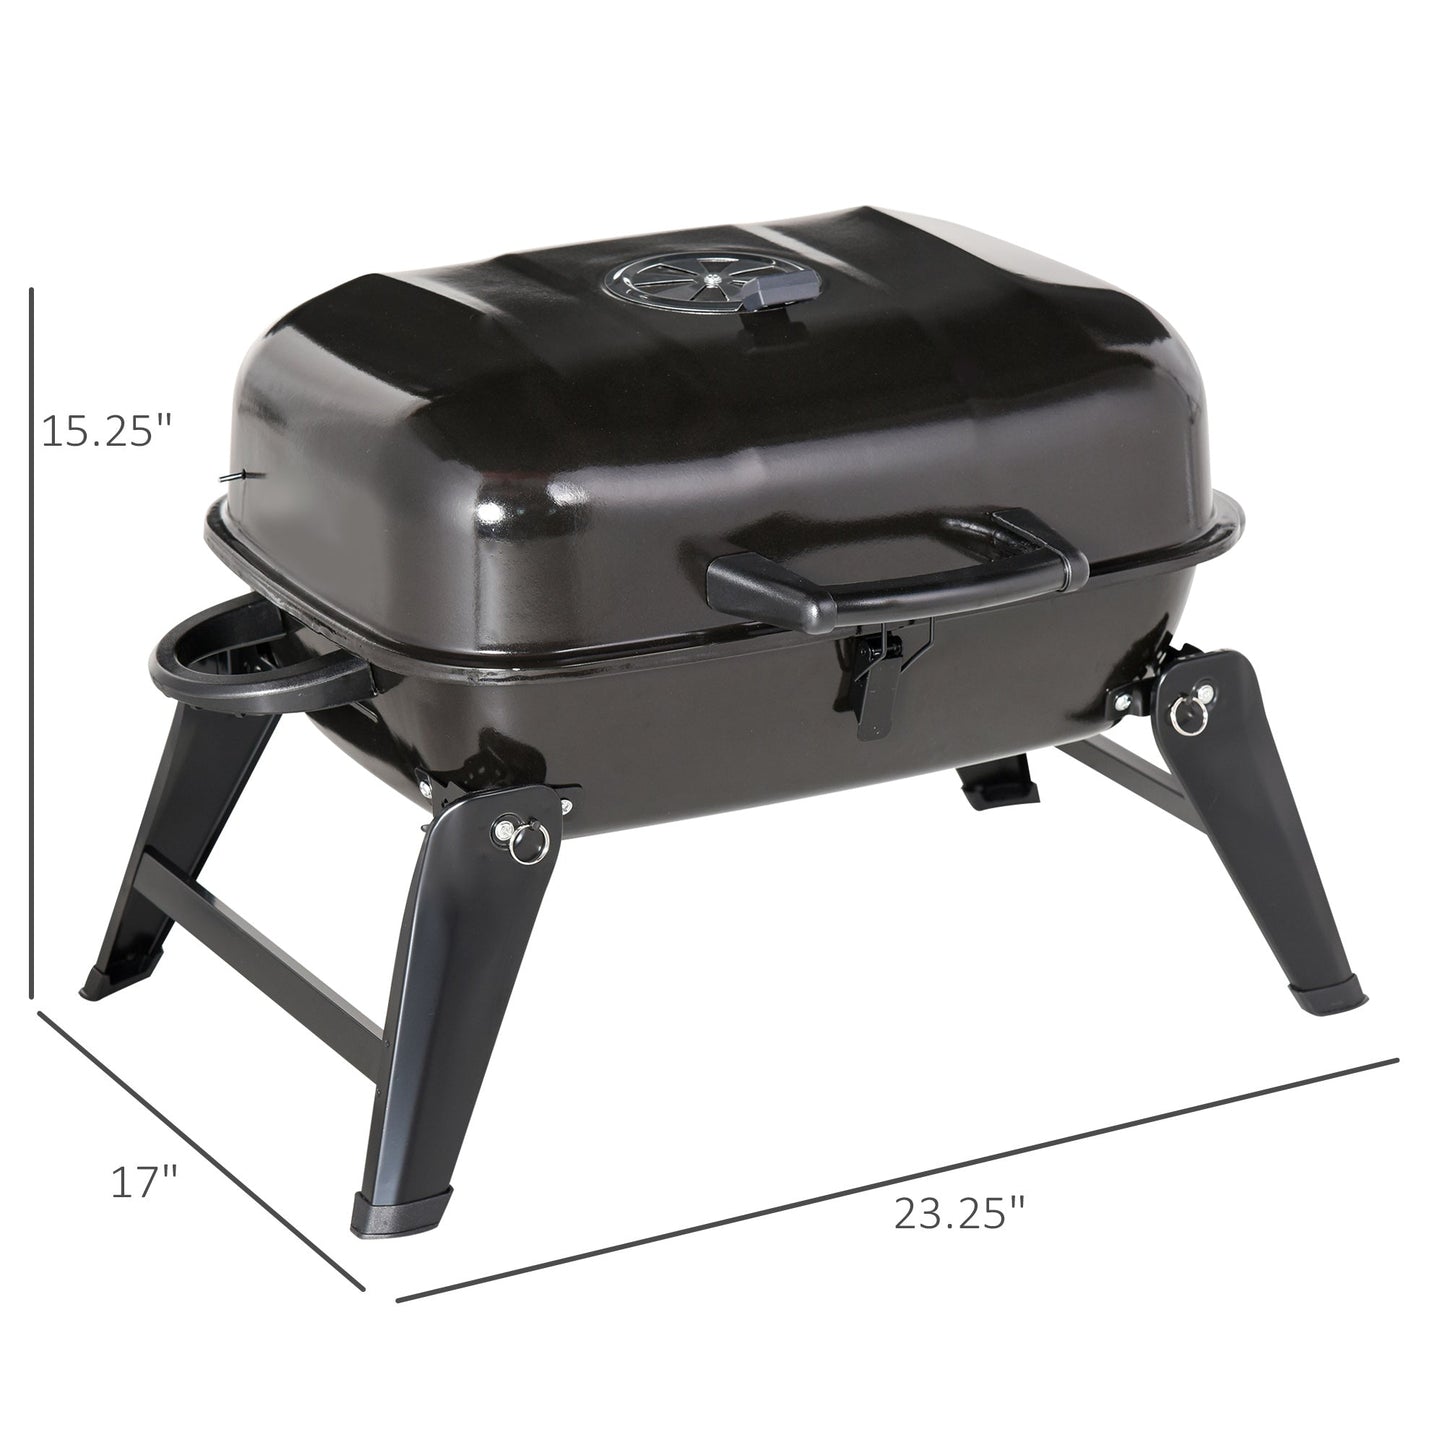 Outdoor and Garden-14'' Charcoal Barbecue Grill with Portable Anti-Scalding Handle Design, Folding Legs for Outdoor BBQ for Poolside, Backyard, Garden - Outdoor Style Company